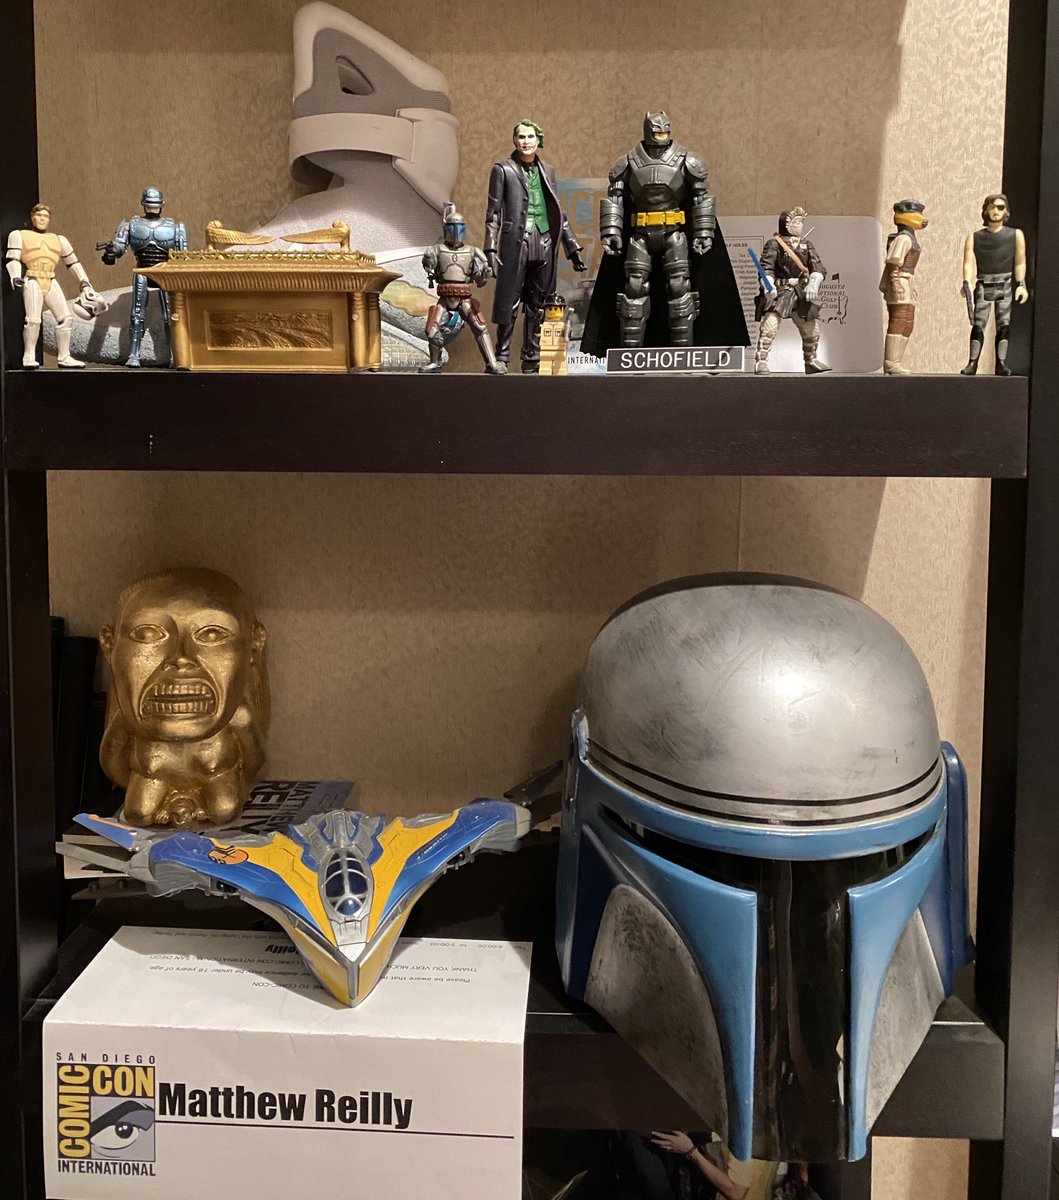 COMING LATER THIS WEEK: JUNE 1: Cover reveal for THE TWO LOST MOUNTAINS. JUNE 5: A brand-new rip-roarin’ rootin’-tootin’ Jack West Jr short story is released. (Oh and this is a shelf in my office. LEGO Jack is in there with the Ark, Han and Snake. See if you can spot him!)